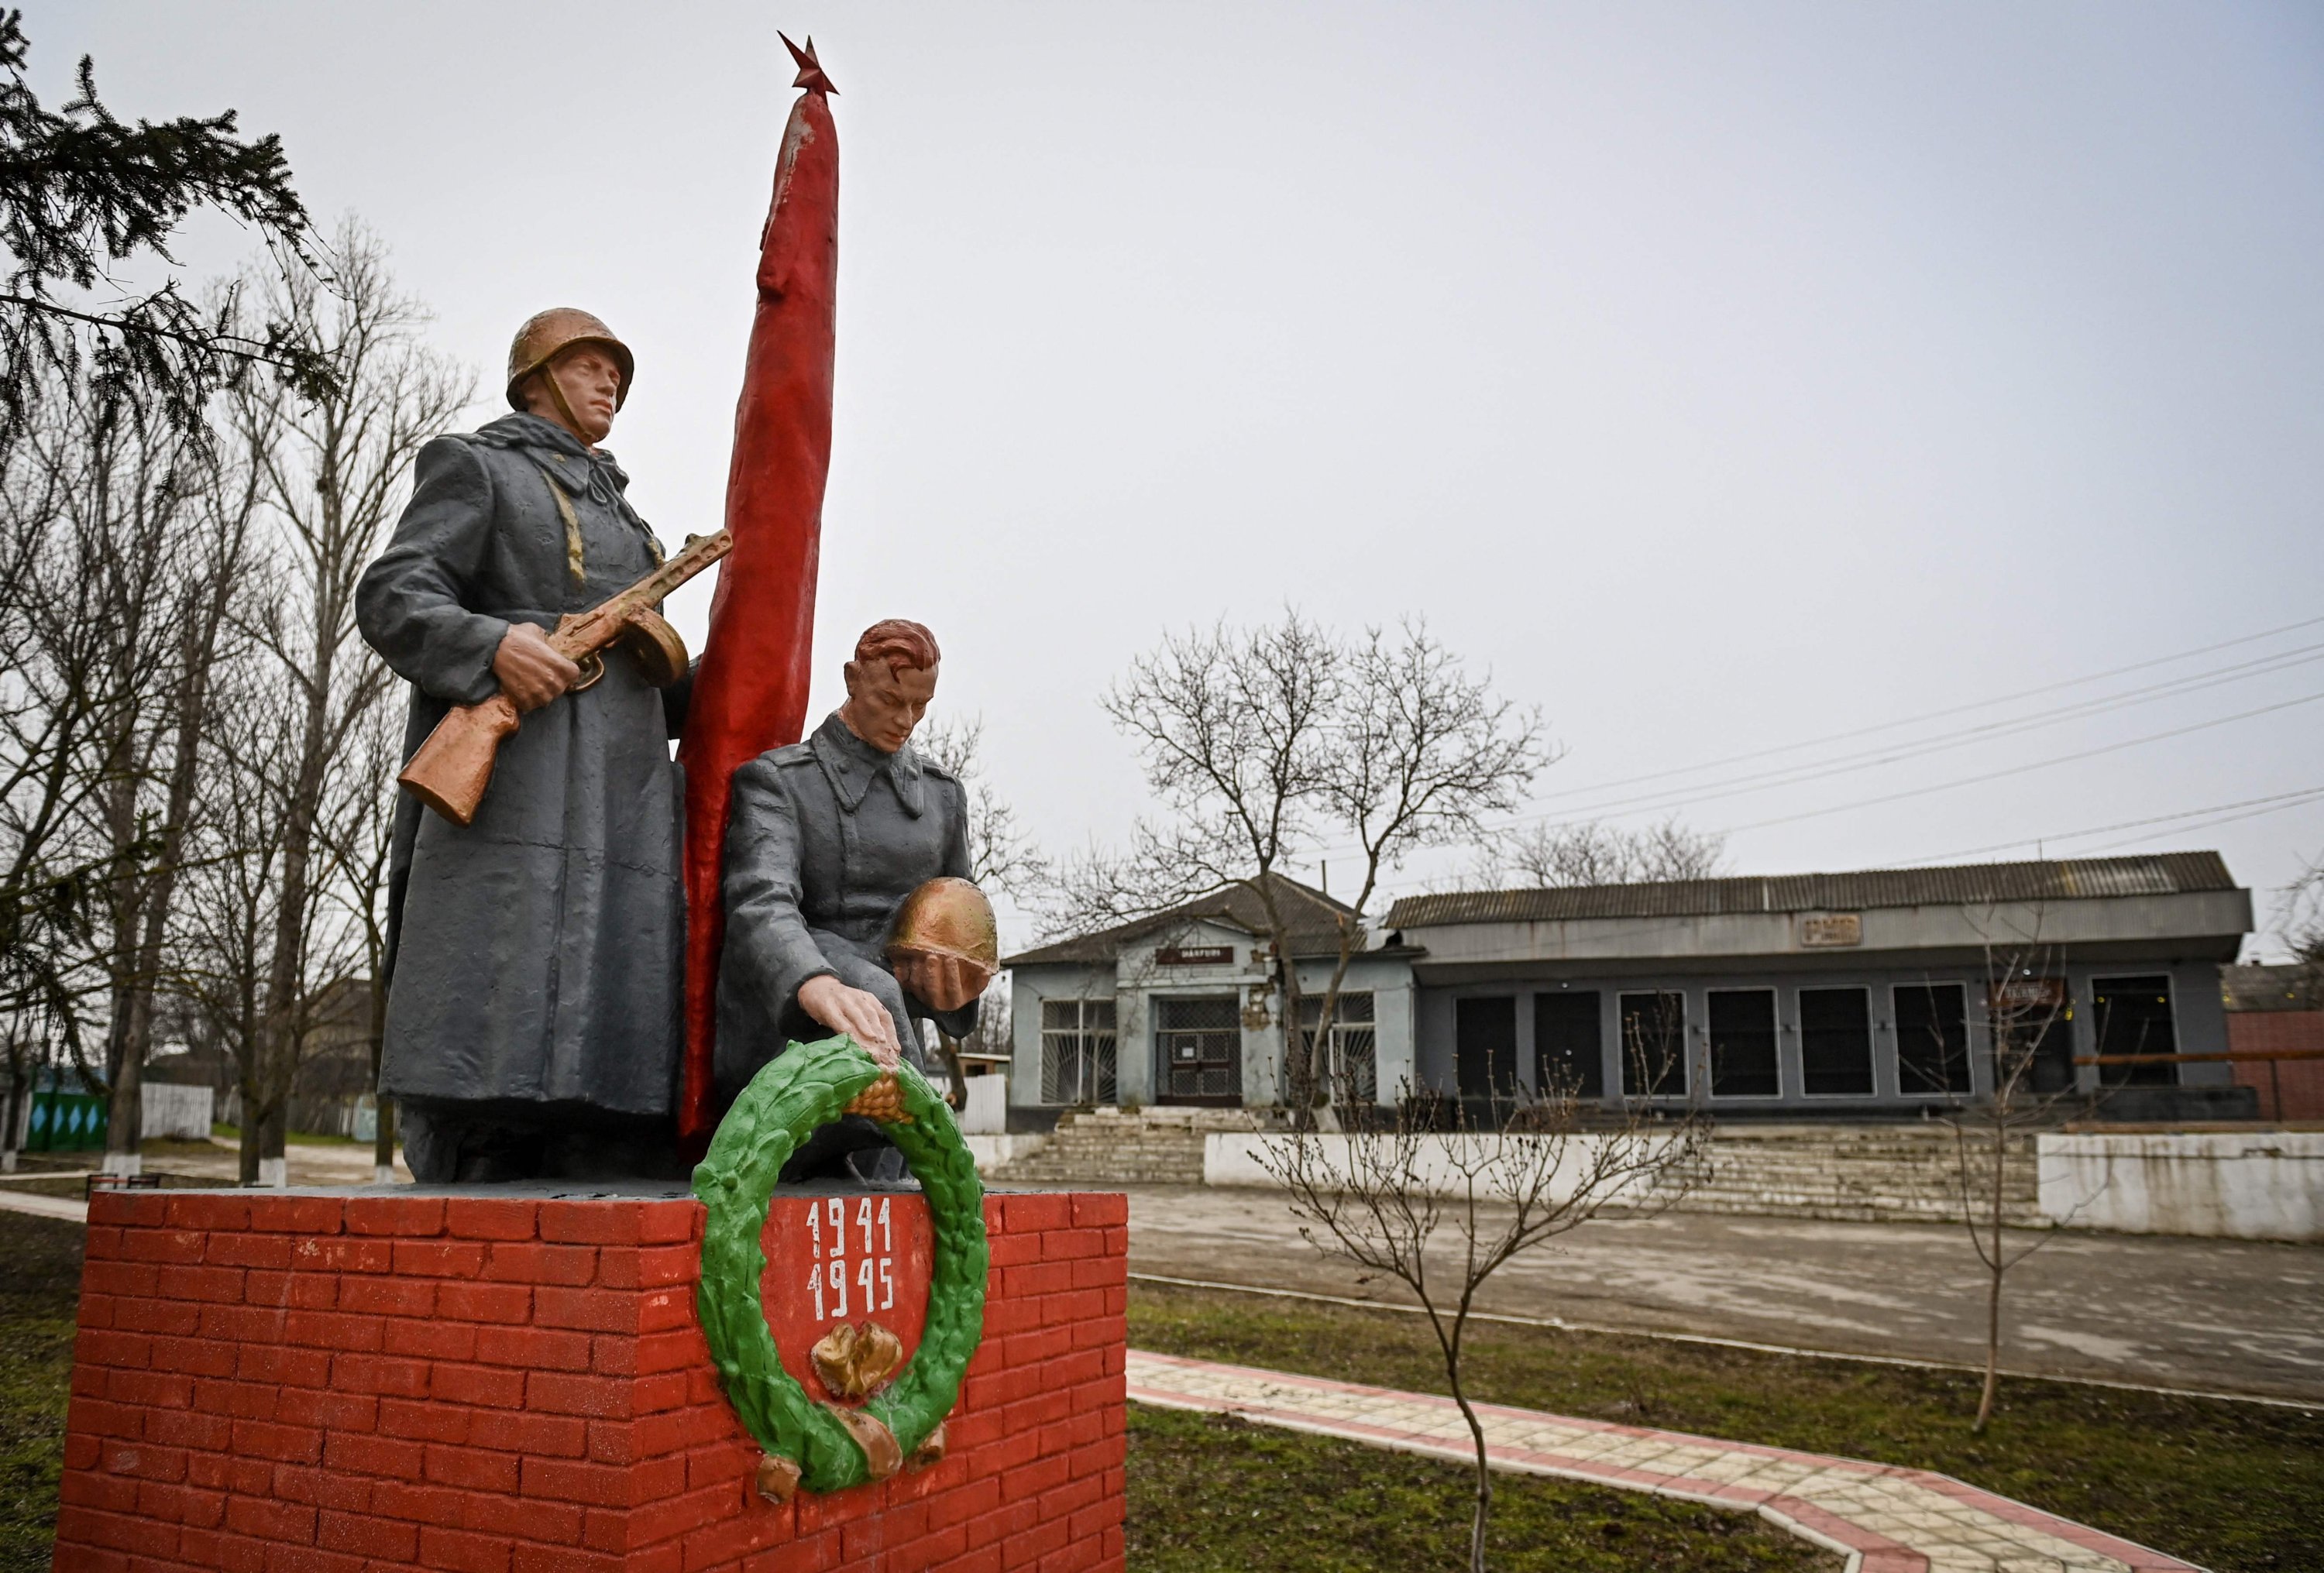 A monument for soldiers of the Soviet army killed in World War II in Bujor village, western Moldova, March 25, 2021. (AFP Photo)